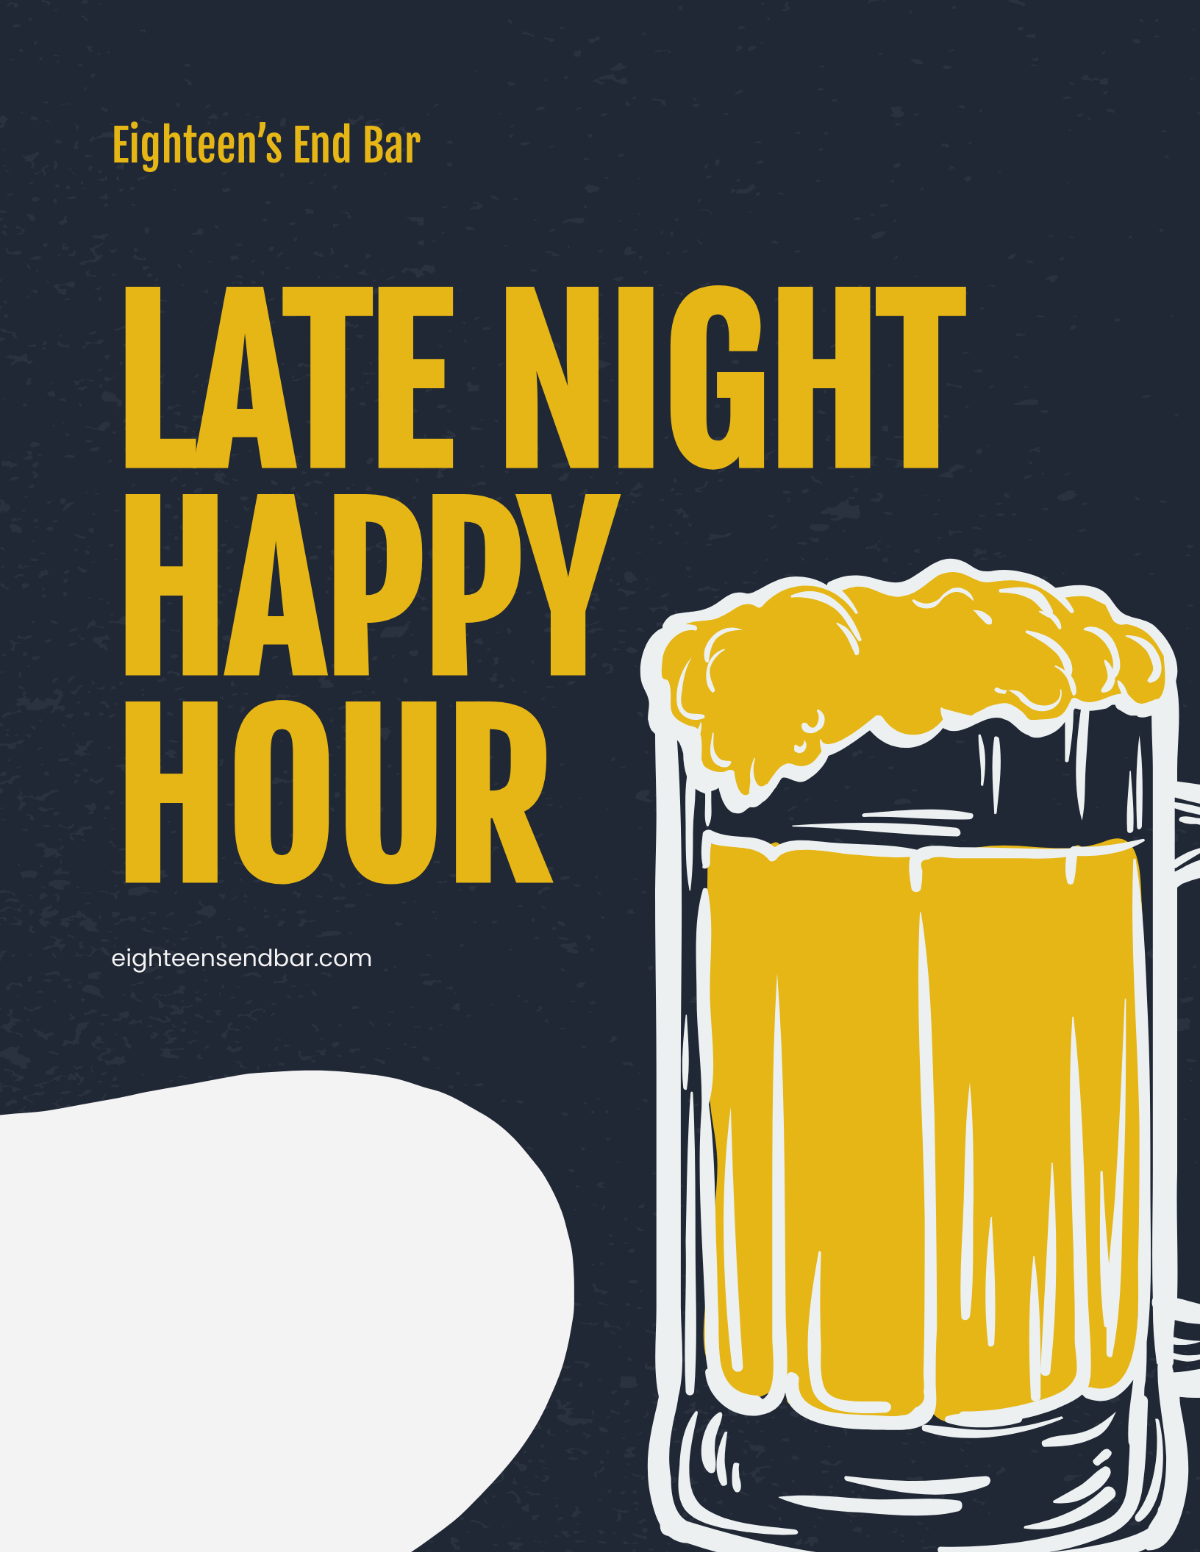 Late Night Happy Hour Flyer